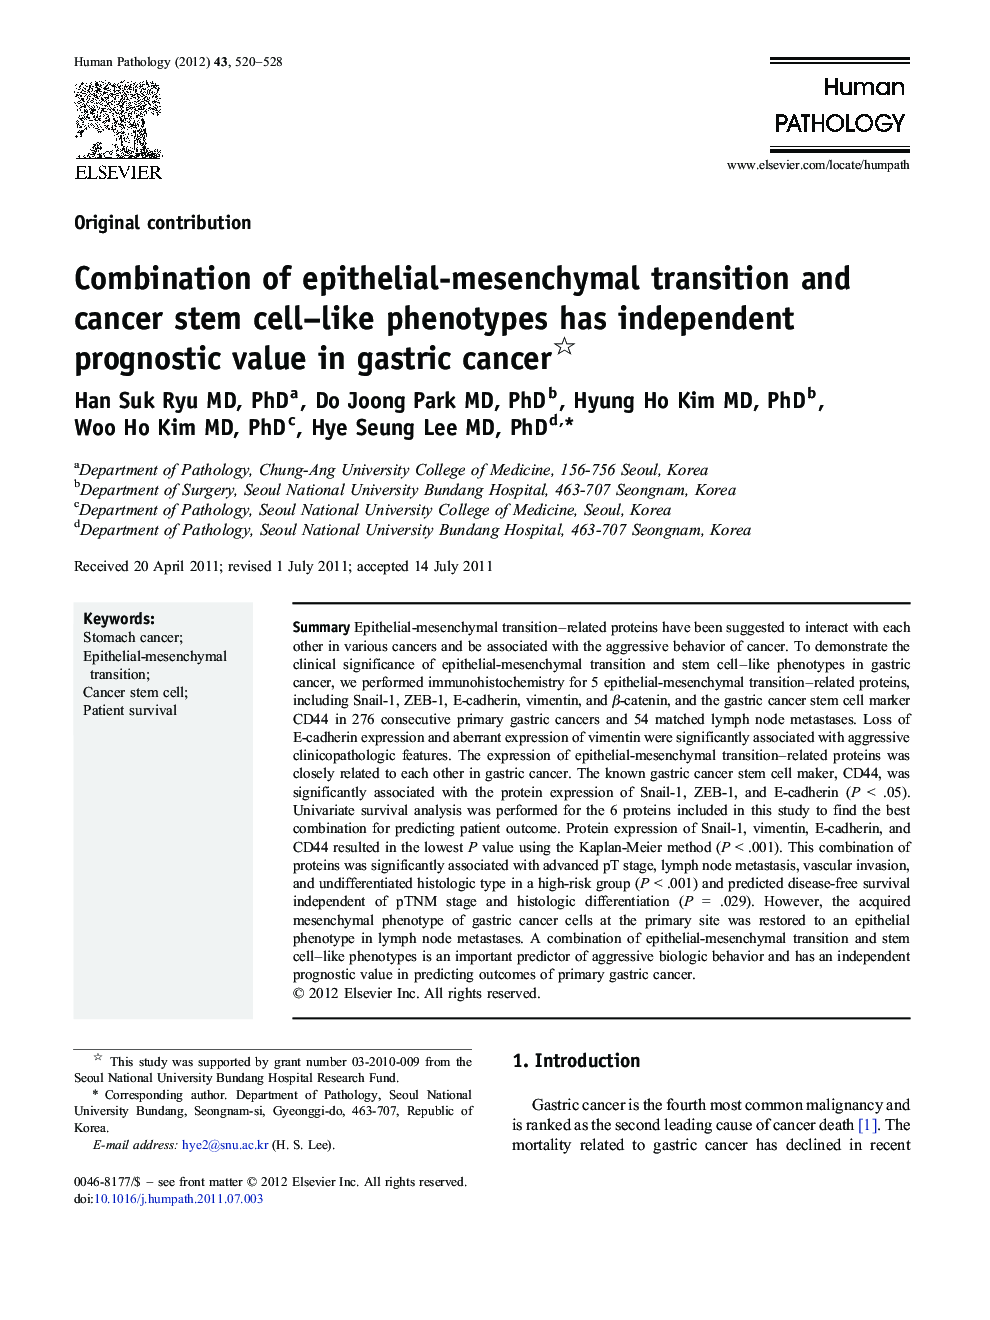 Combination of epithelial-mesenchymal transition and cancer stem cell–like phenotypes has independent prognostic value in gastric cancer 